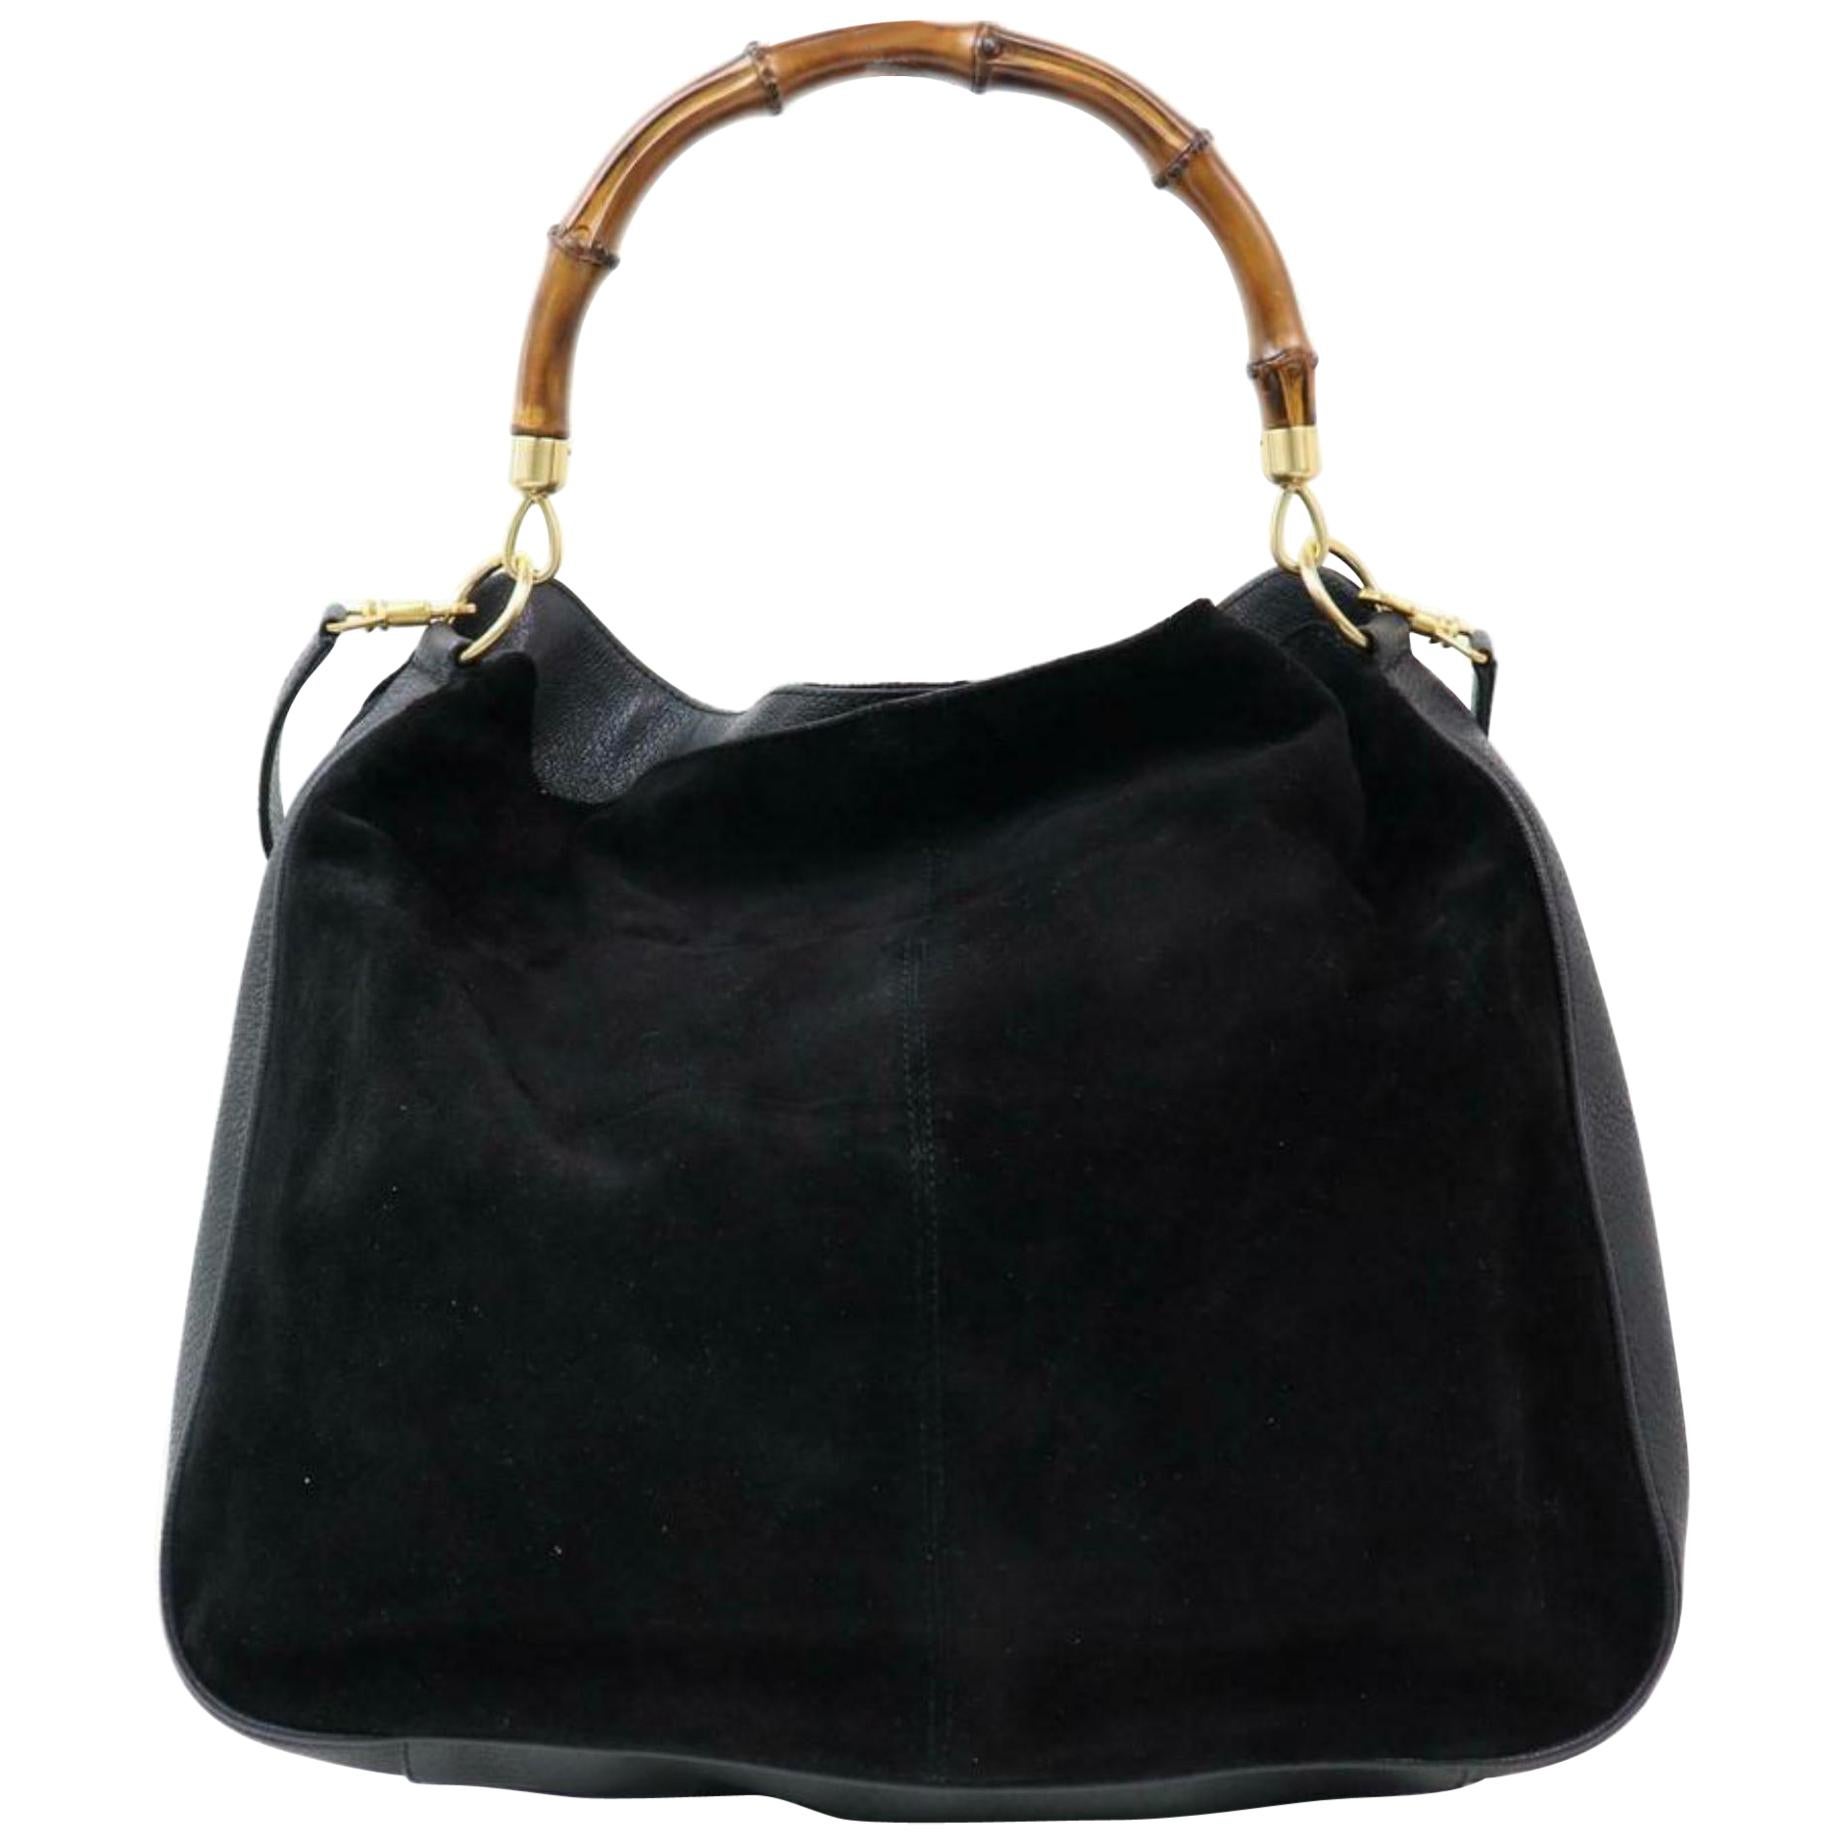 Gucci Bamboo 2way Hobo 870254 Black Suede Leather Shoulder Bag For Sale